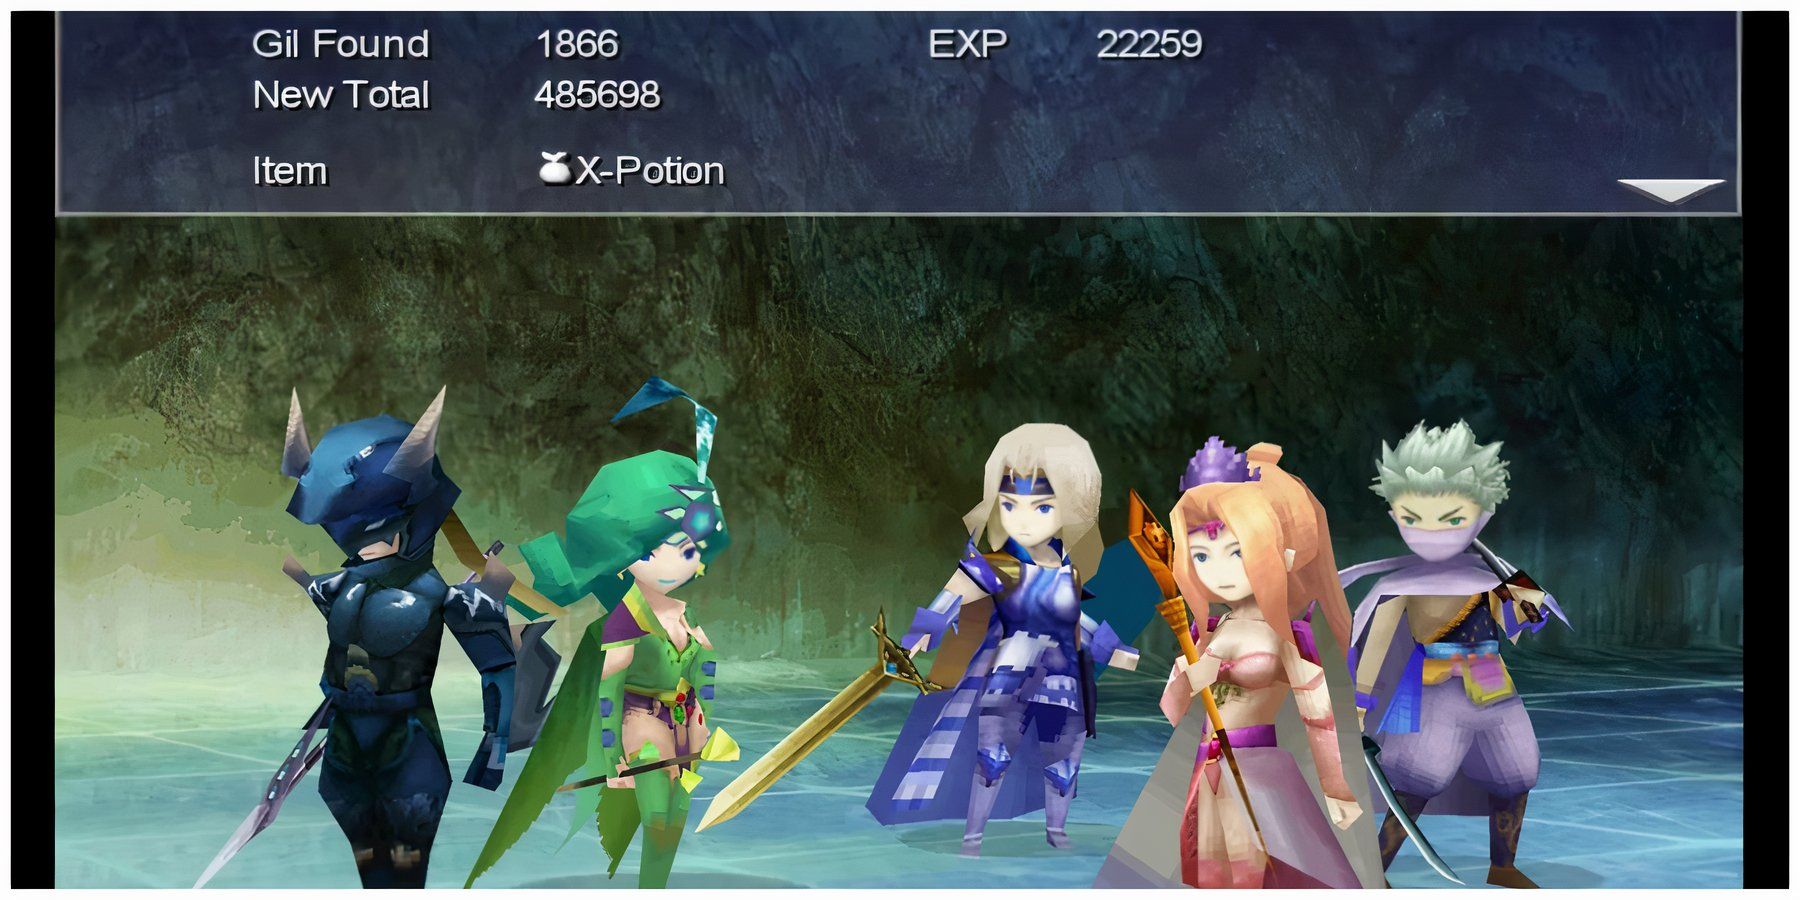 Party featuring Cecil wielding the onion sword post battle in Final Fantasy 4